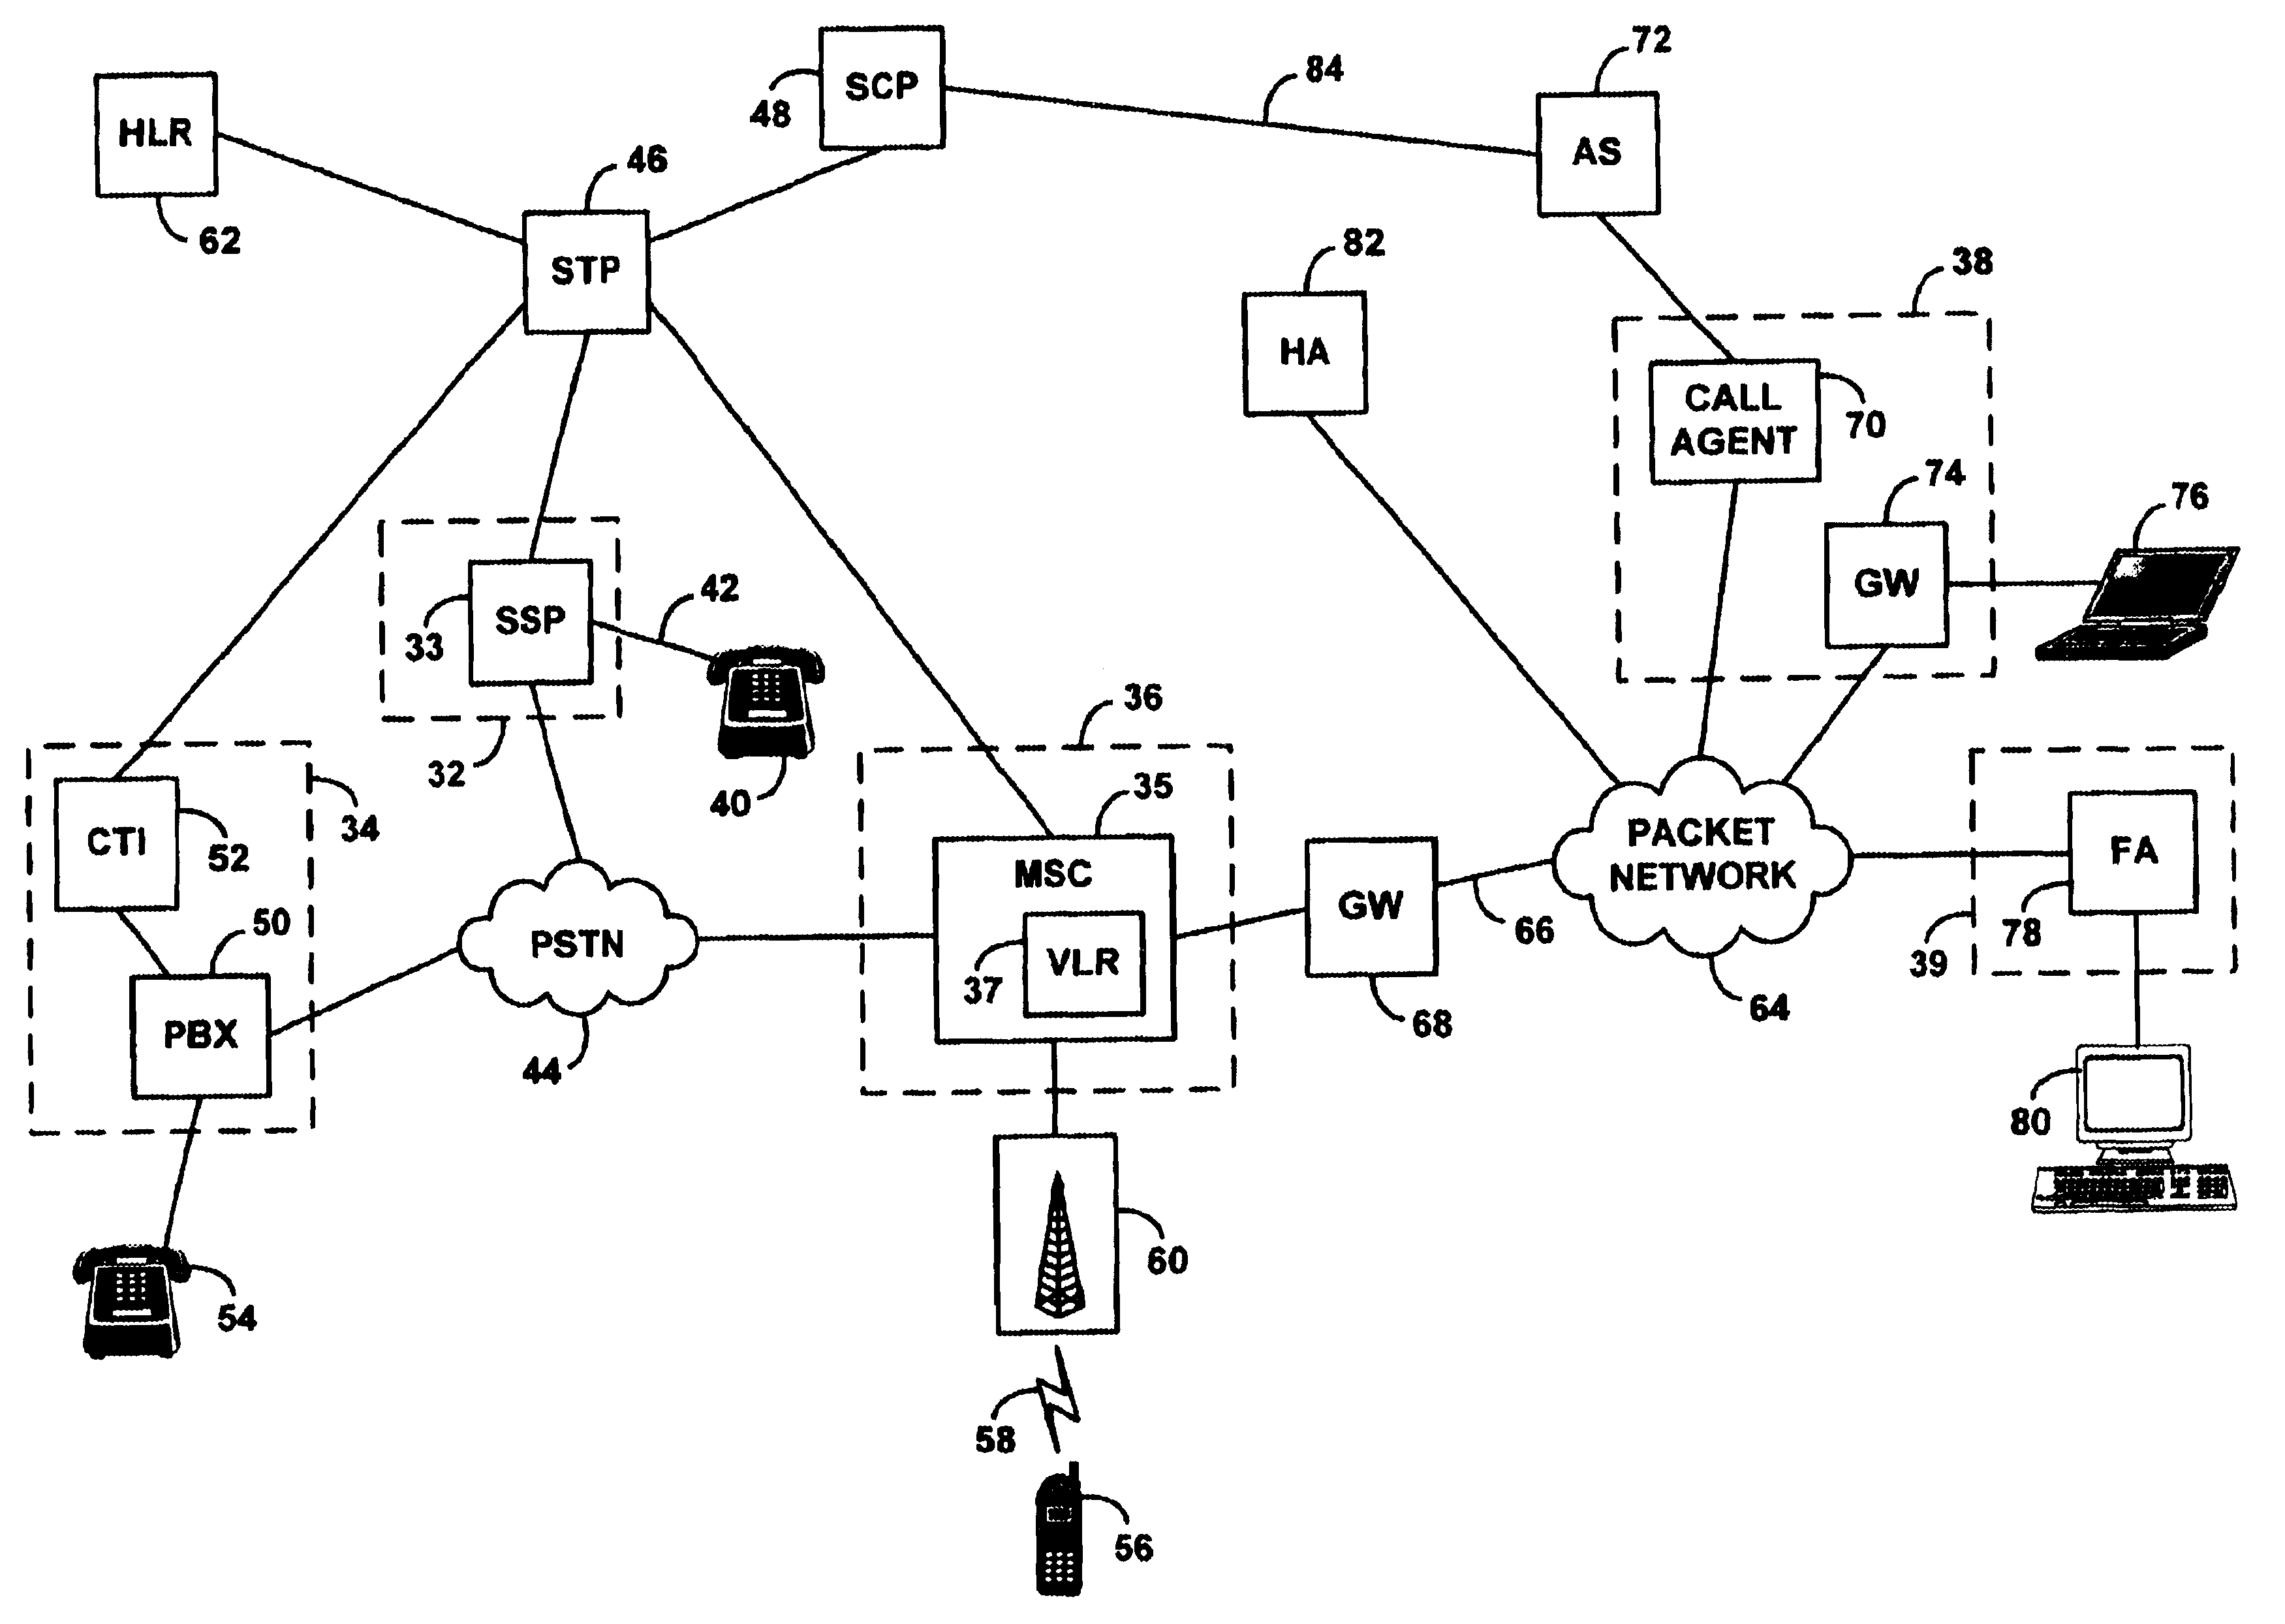 System for controlled provisioning of telecommunications services